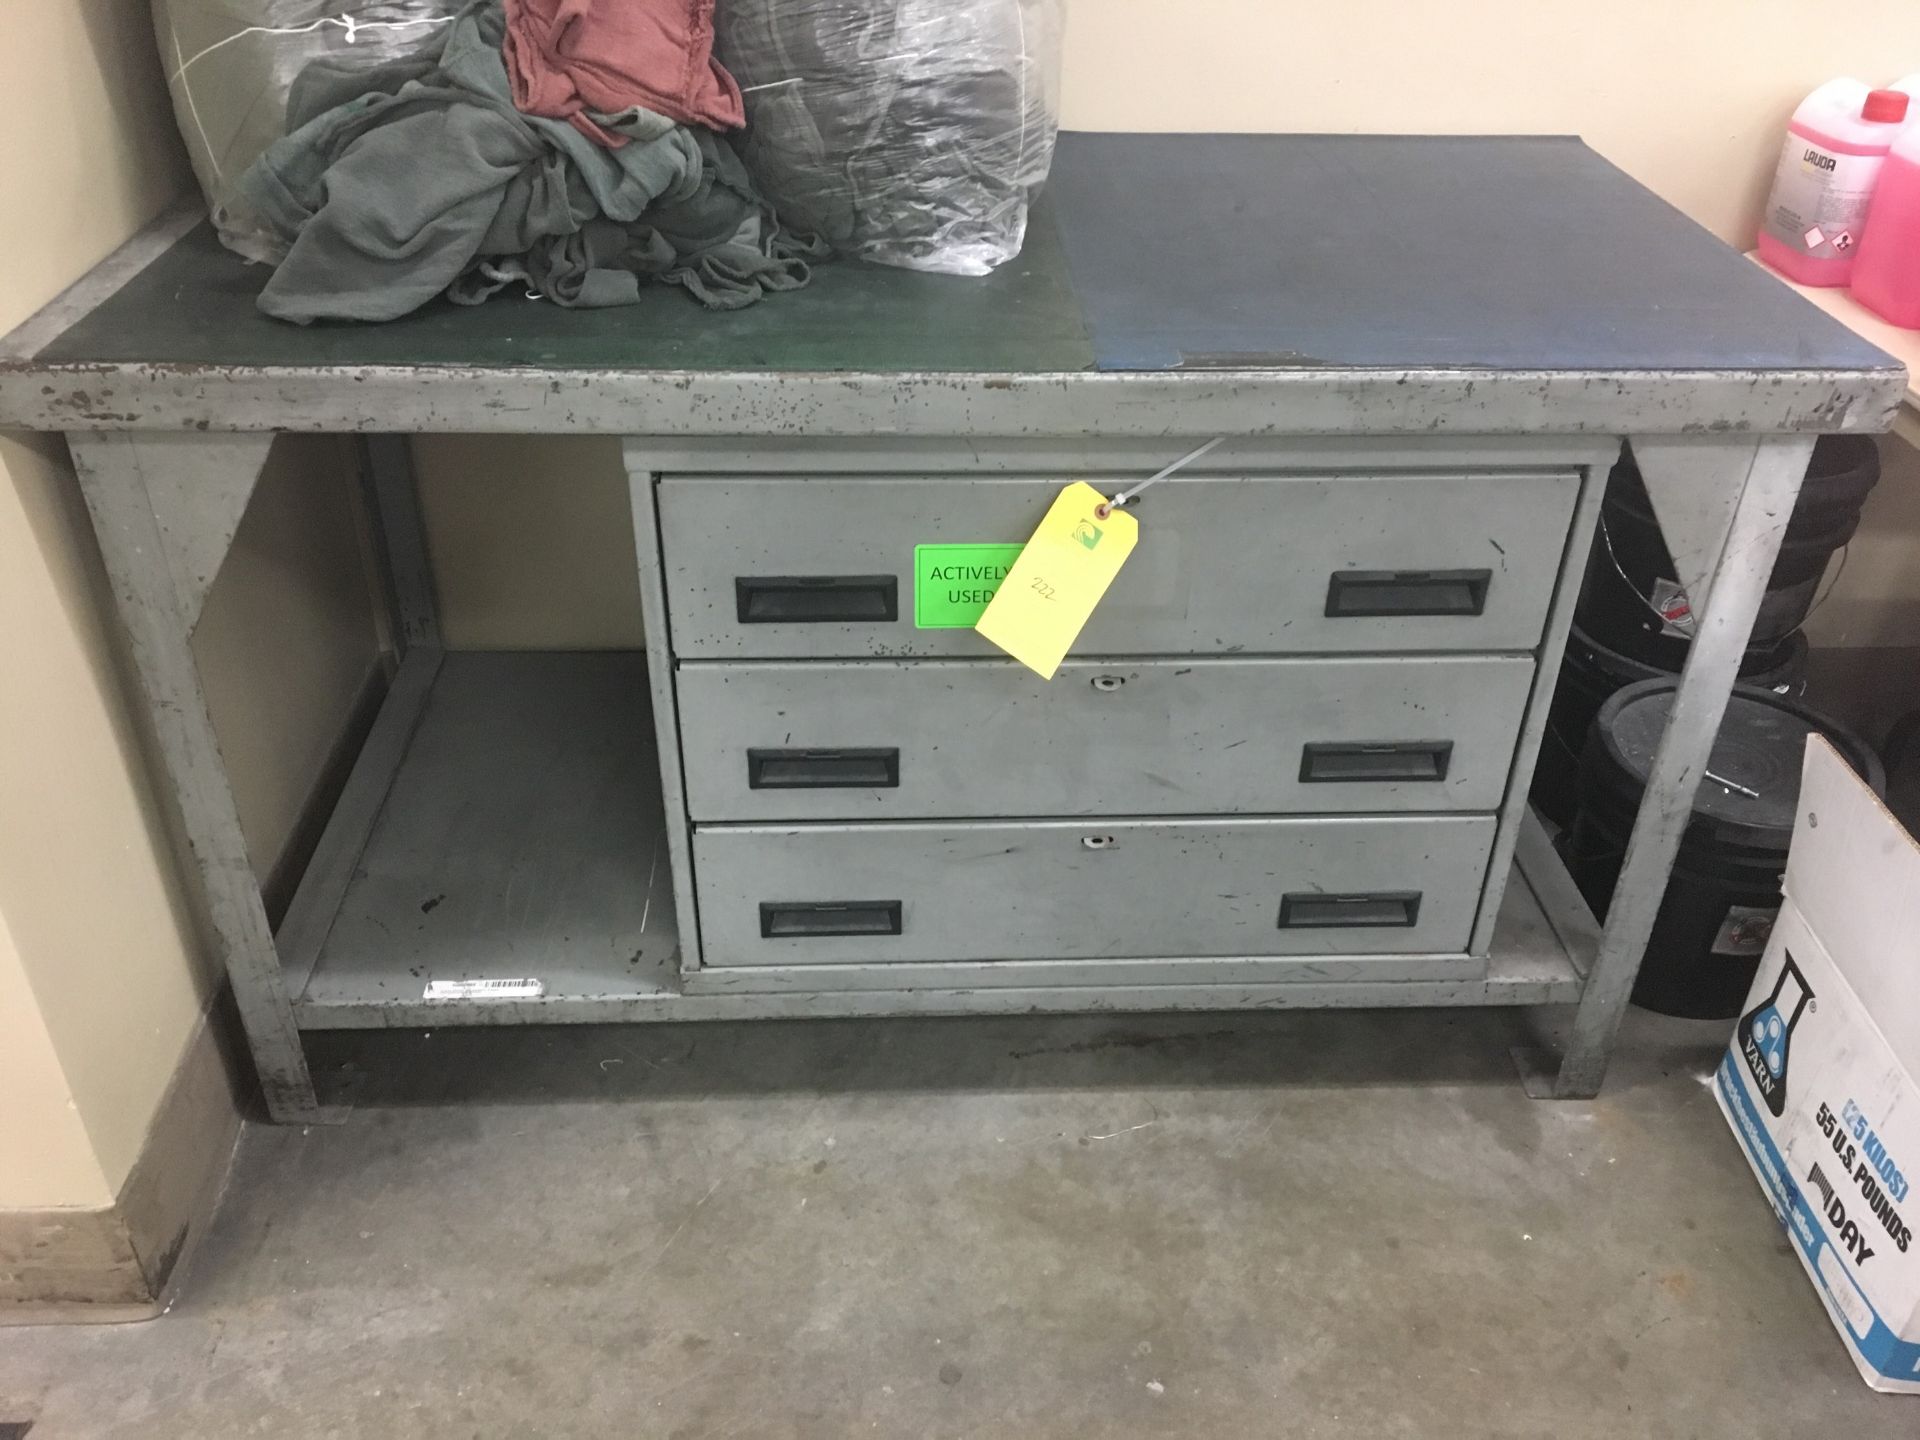 Metal Table and Set of Drawers, Removal Fee: $20